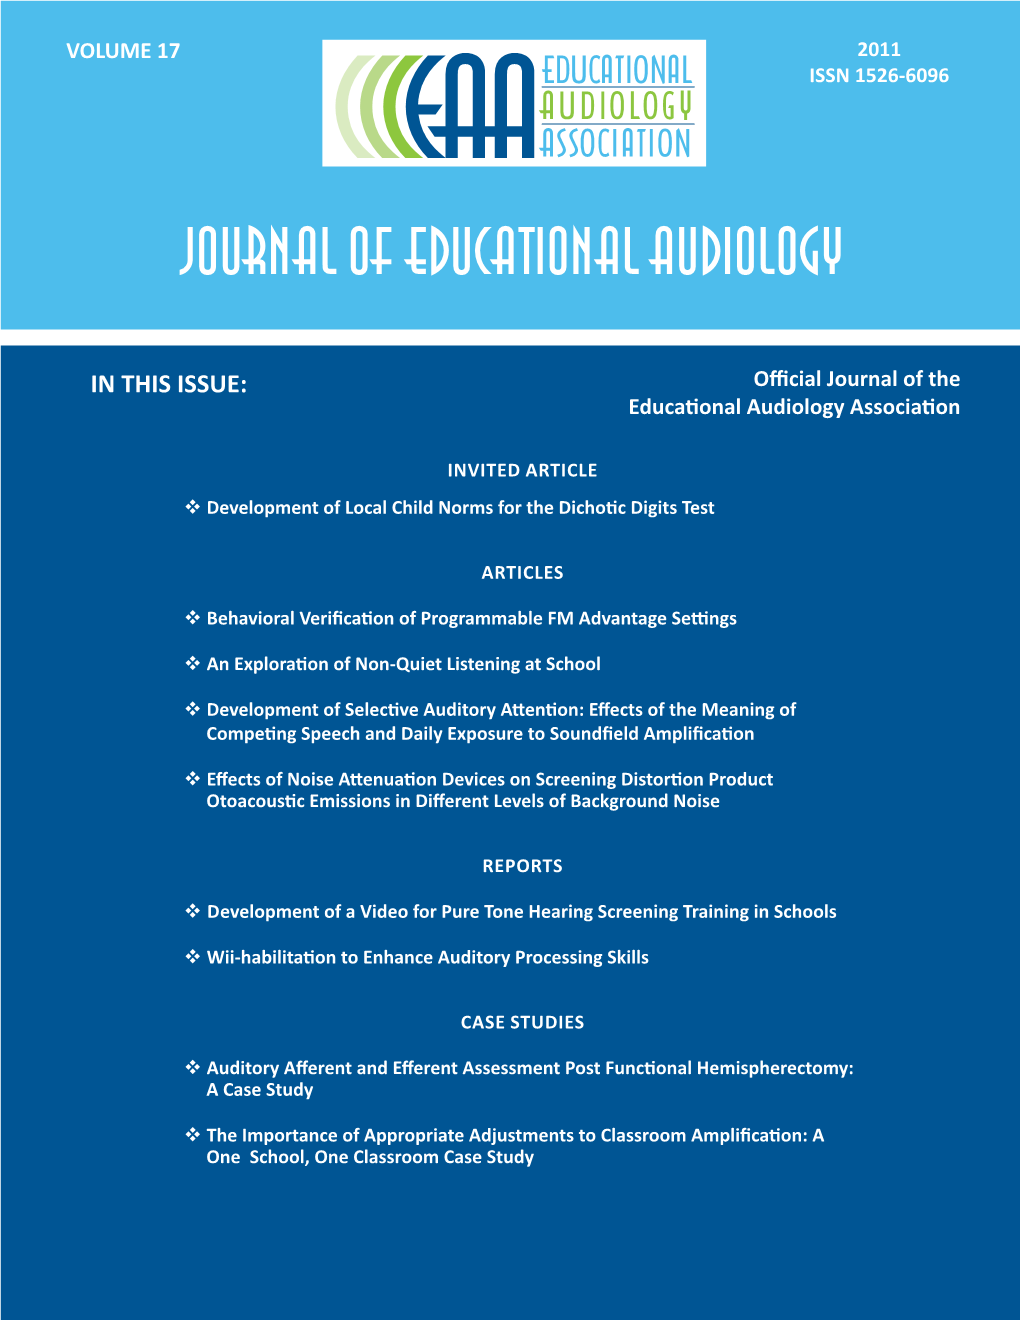 Journal of Educational Audiology